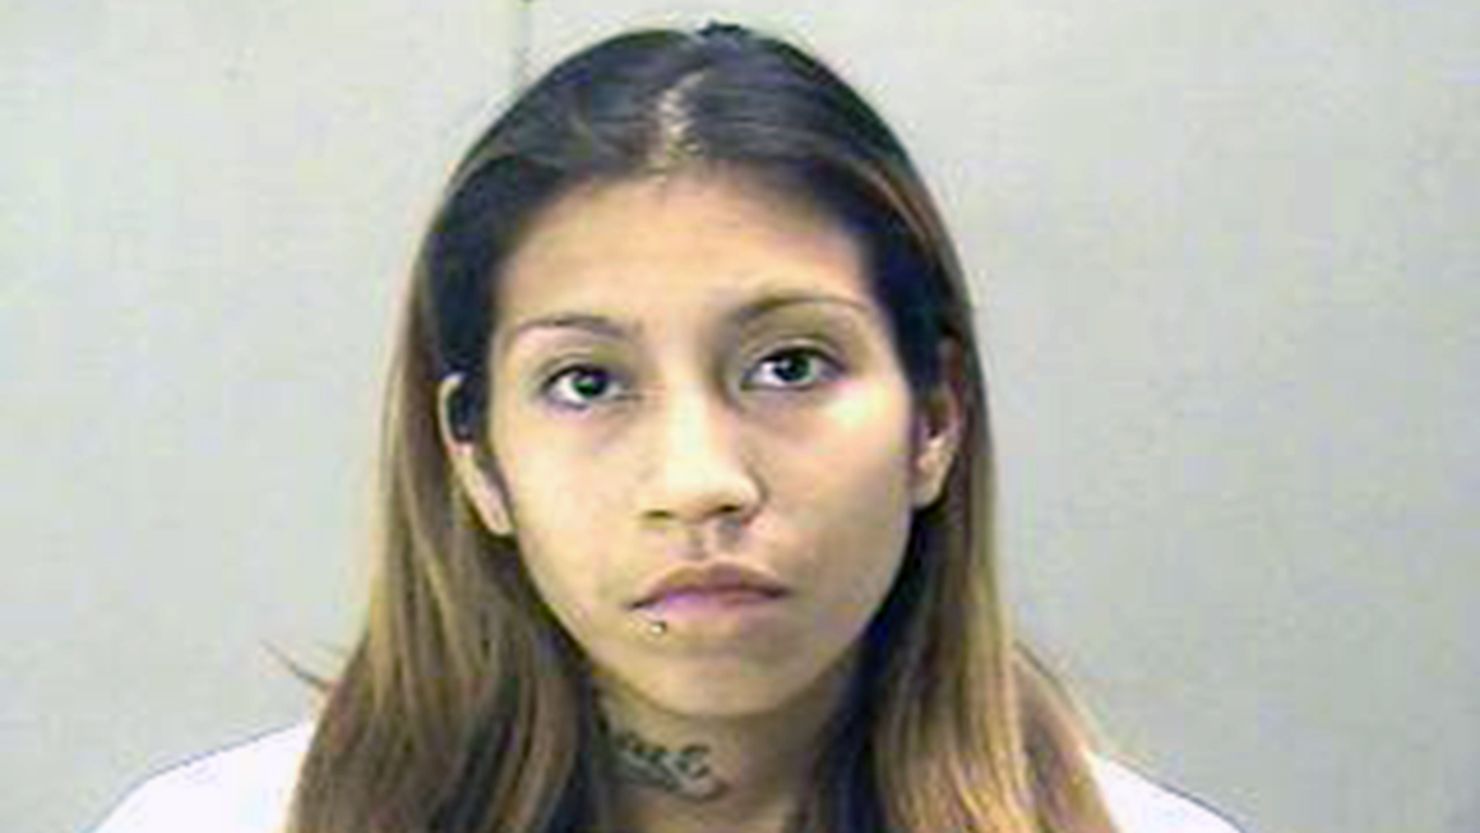 Elizabeth Escalona, 23, admitted gluing her 2-year-old daughter to a wall and beating her over potty training.